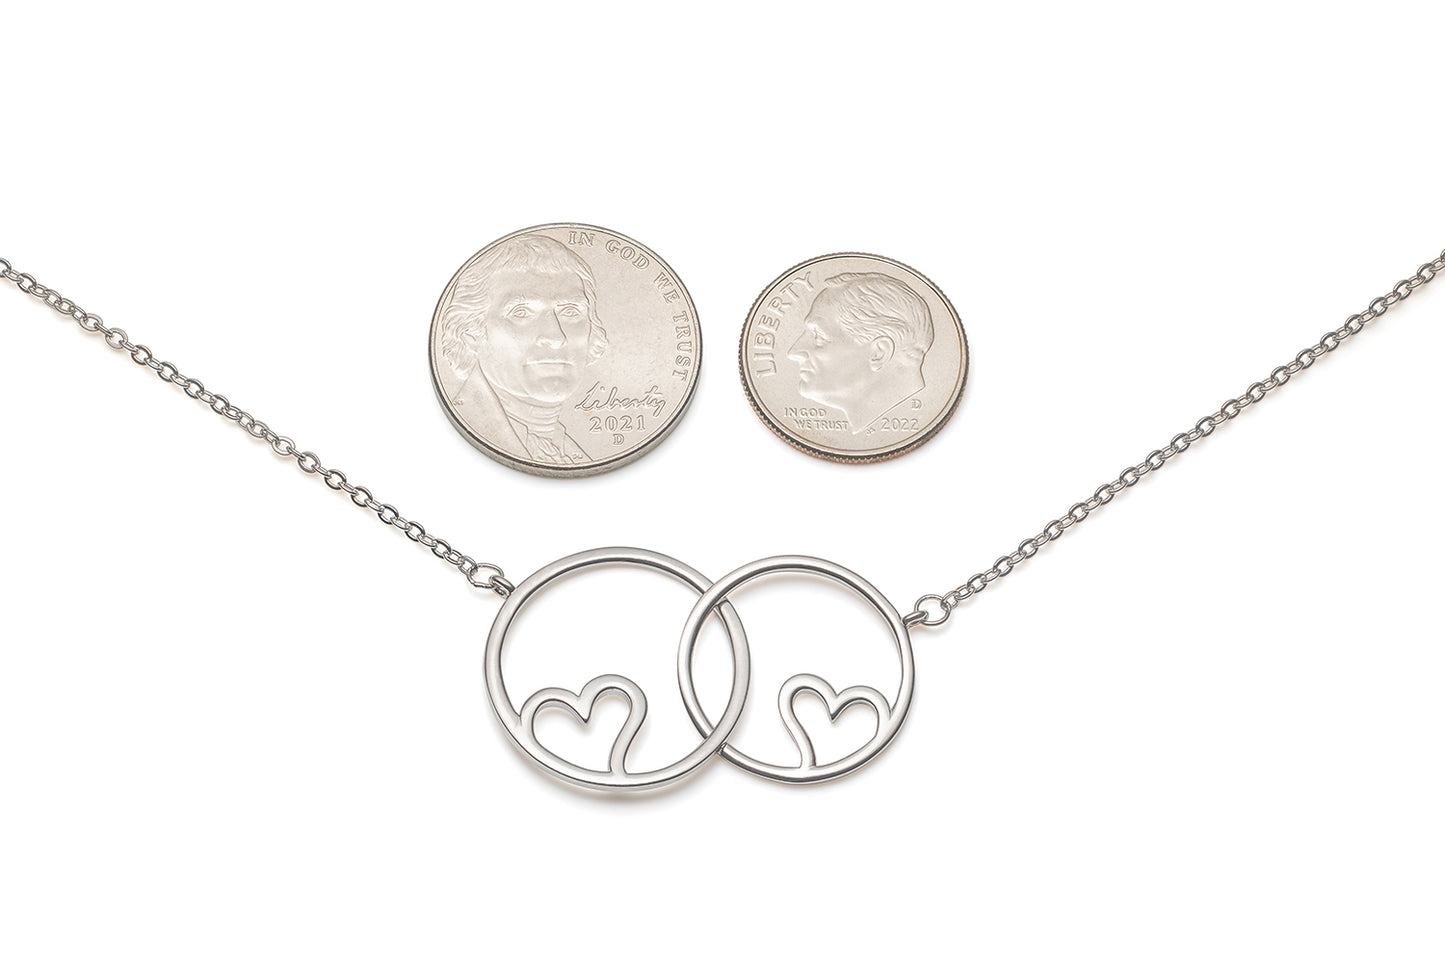 Cinesse 925 Sterling Silver Two Hearts Necklace for Mother-Daughter or Two Hearts As One